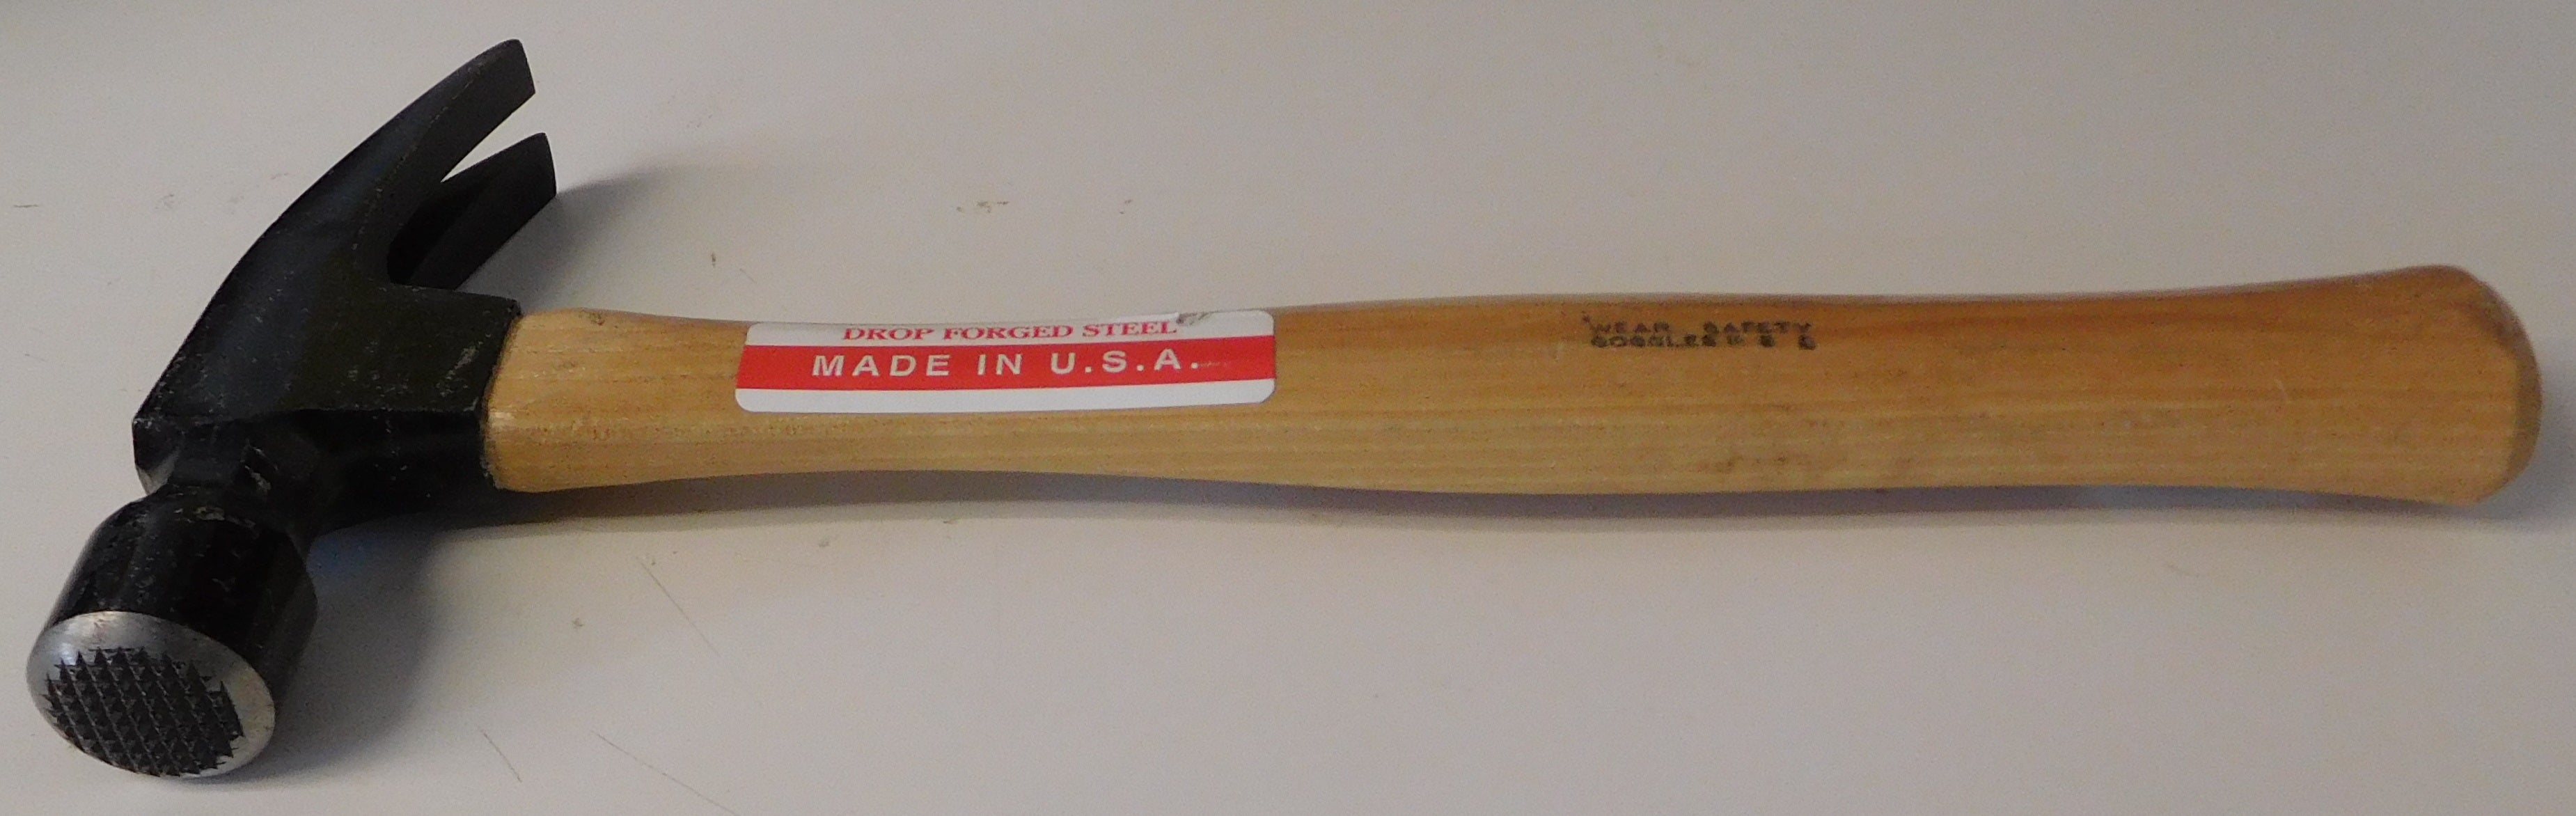 Vaughan and Bushnell 90071 20 oz Rip Hammer Hickory Handle USA